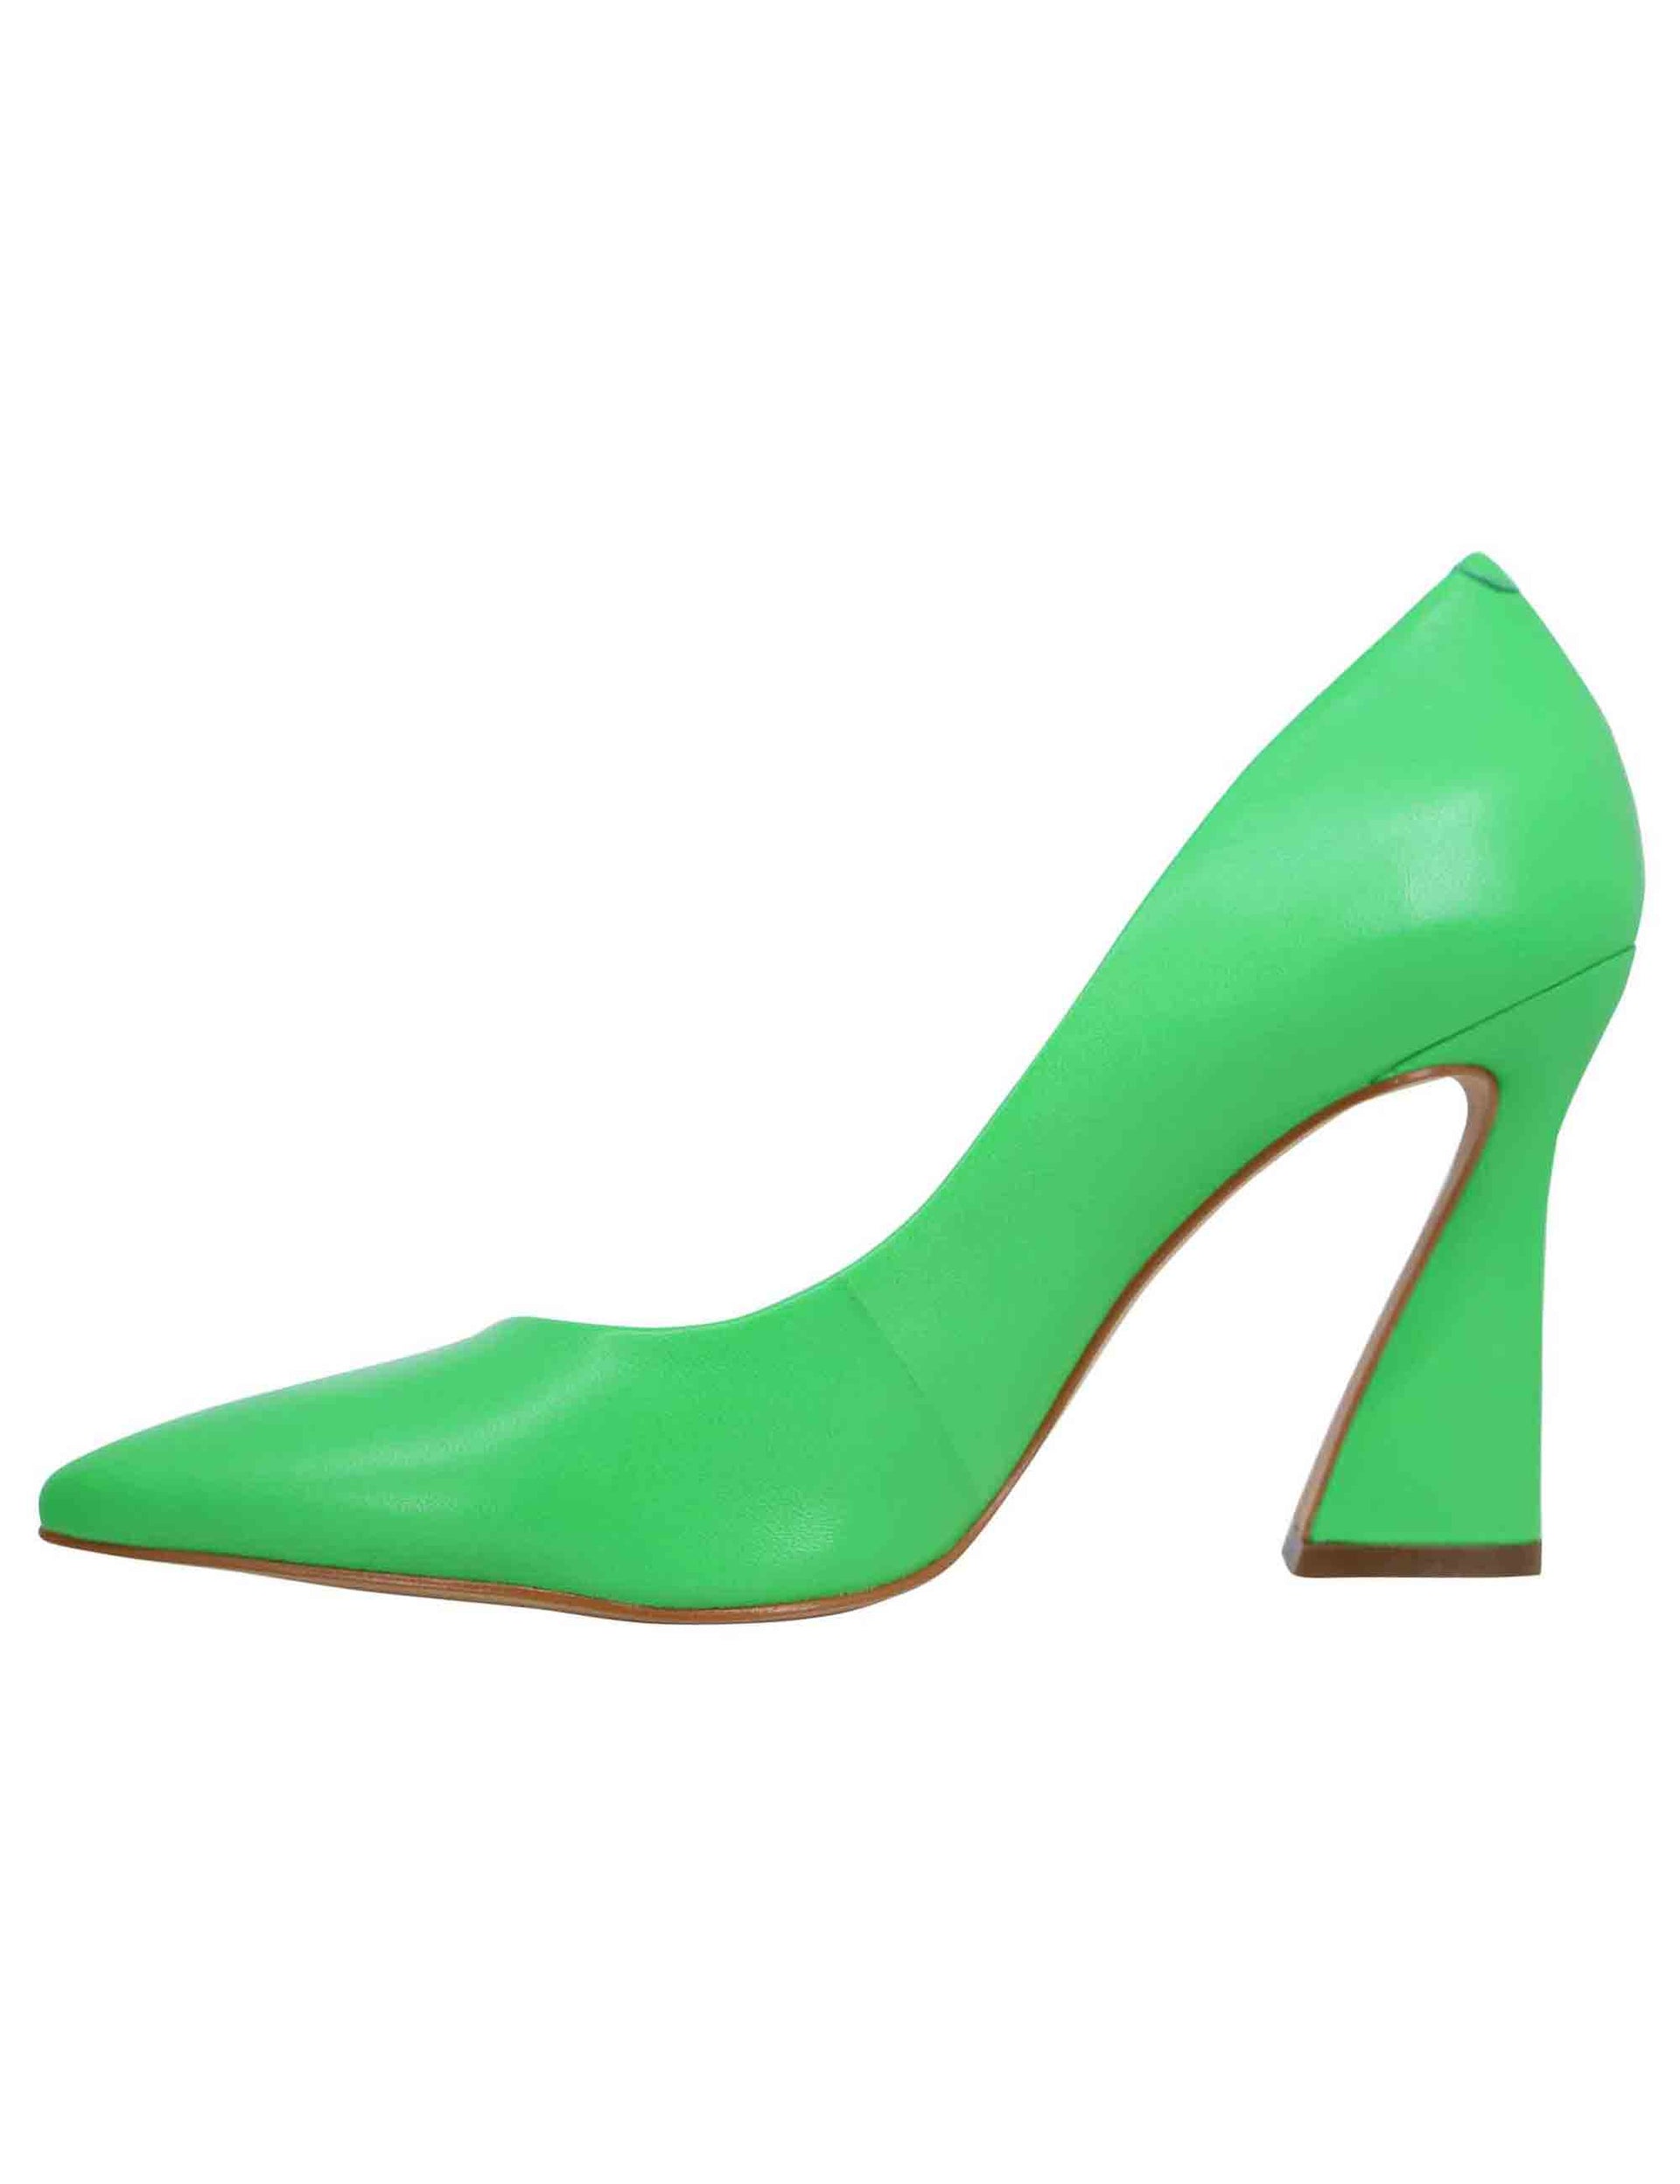 Women's green leather pumps with high heel and pointed toe